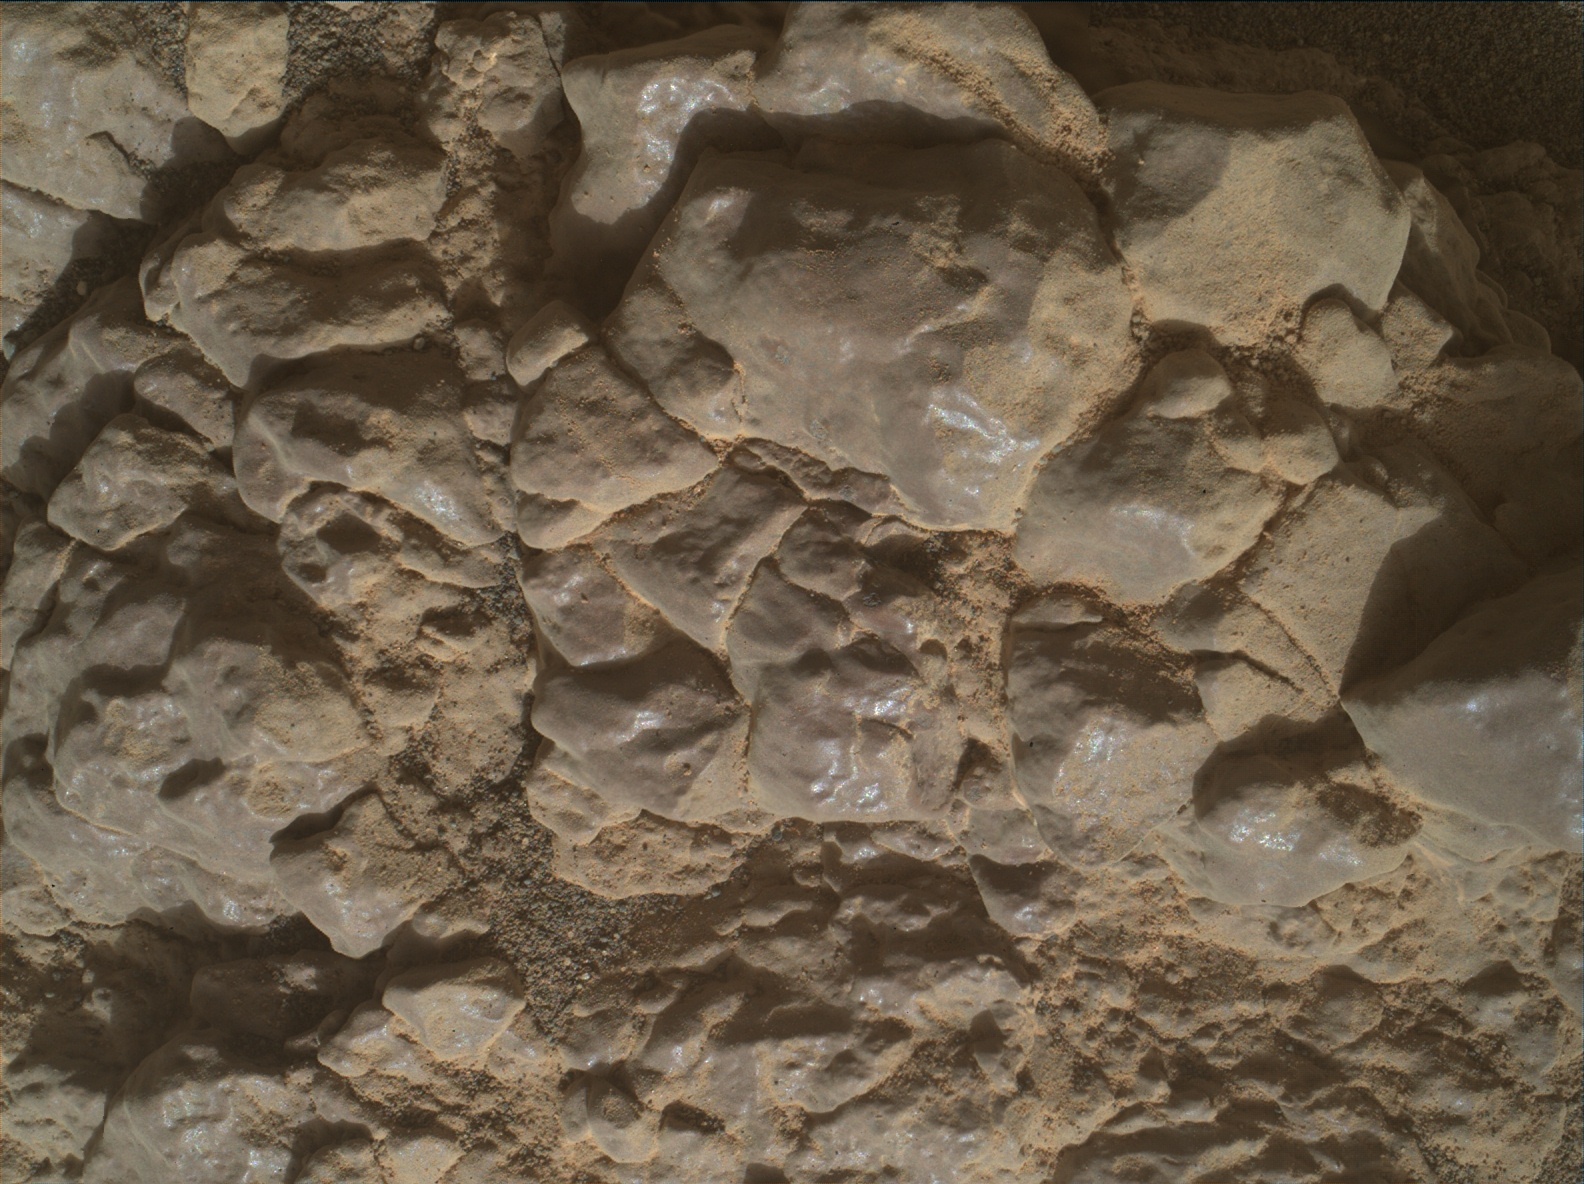 Nasa's Mars rover Curiosity acquired this image using its Mars Hand Lens Imager (MAHLI) on Sol 2592